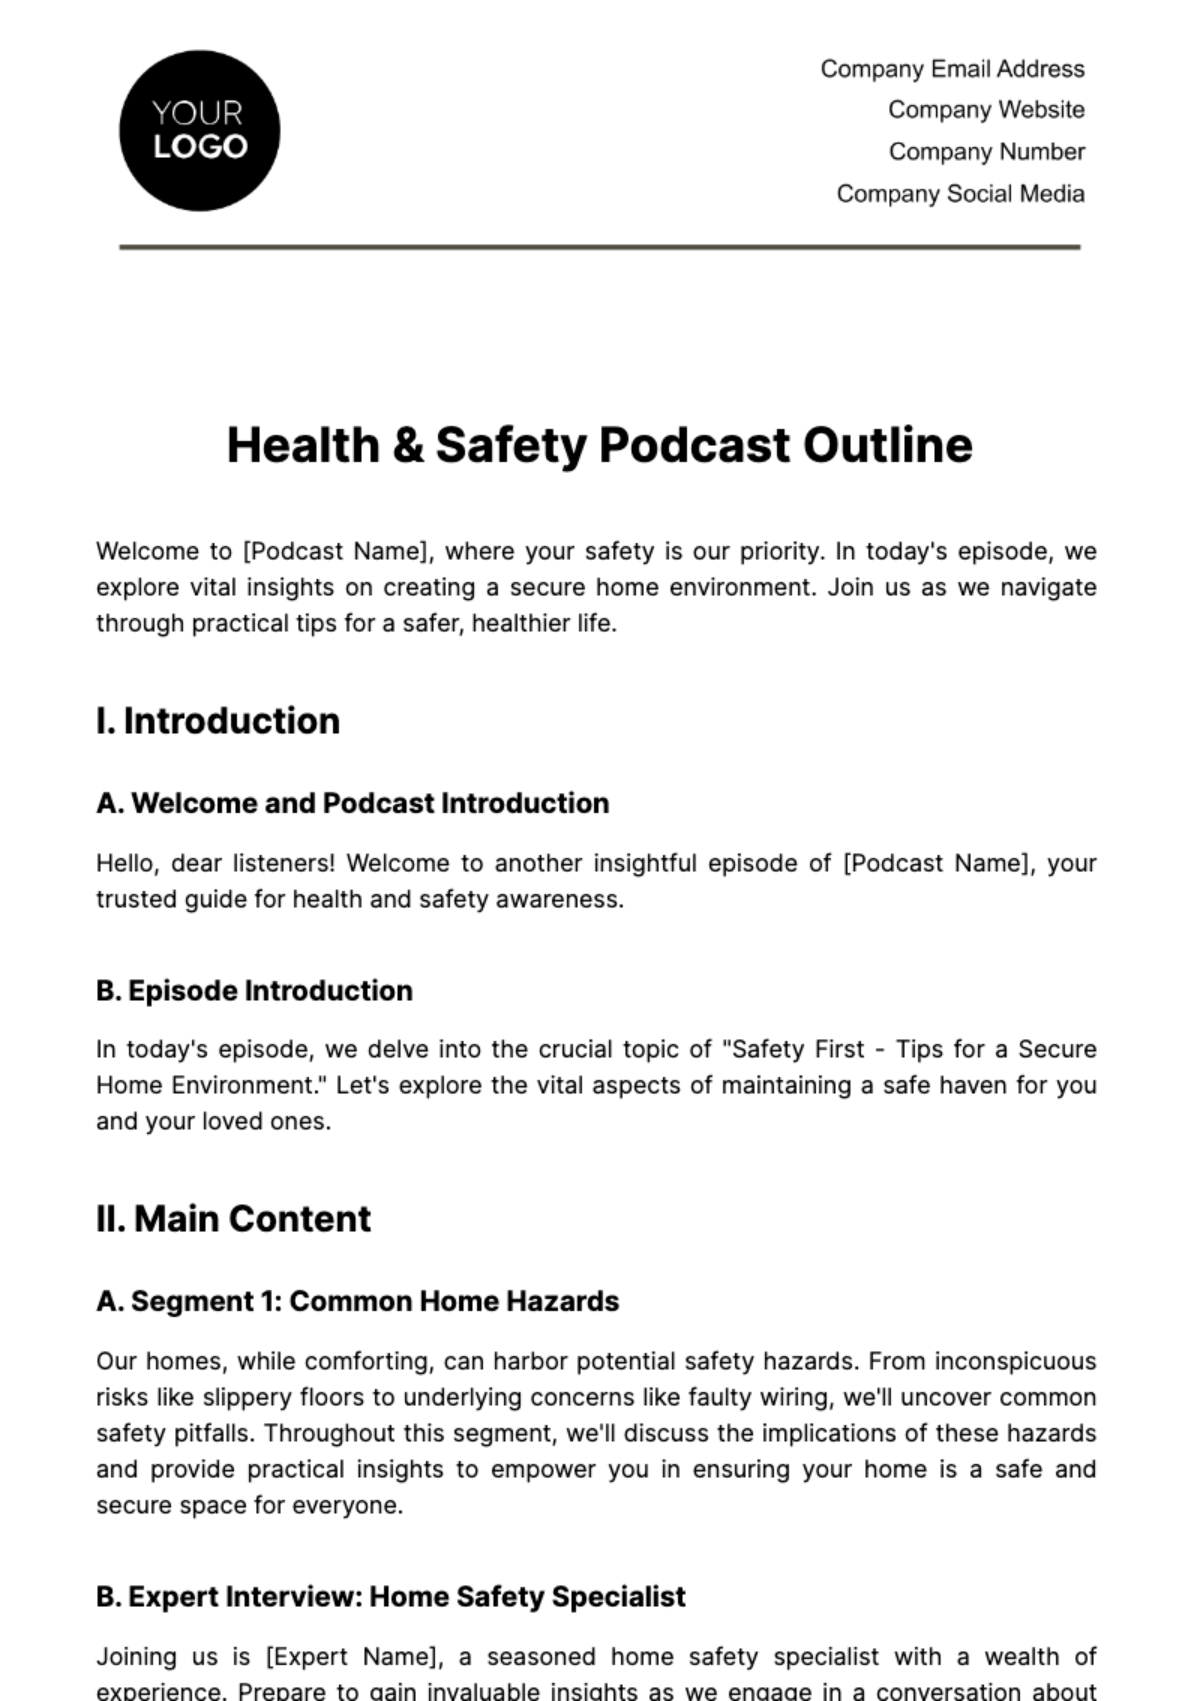 Free Health & Safety Podcast Outline Template